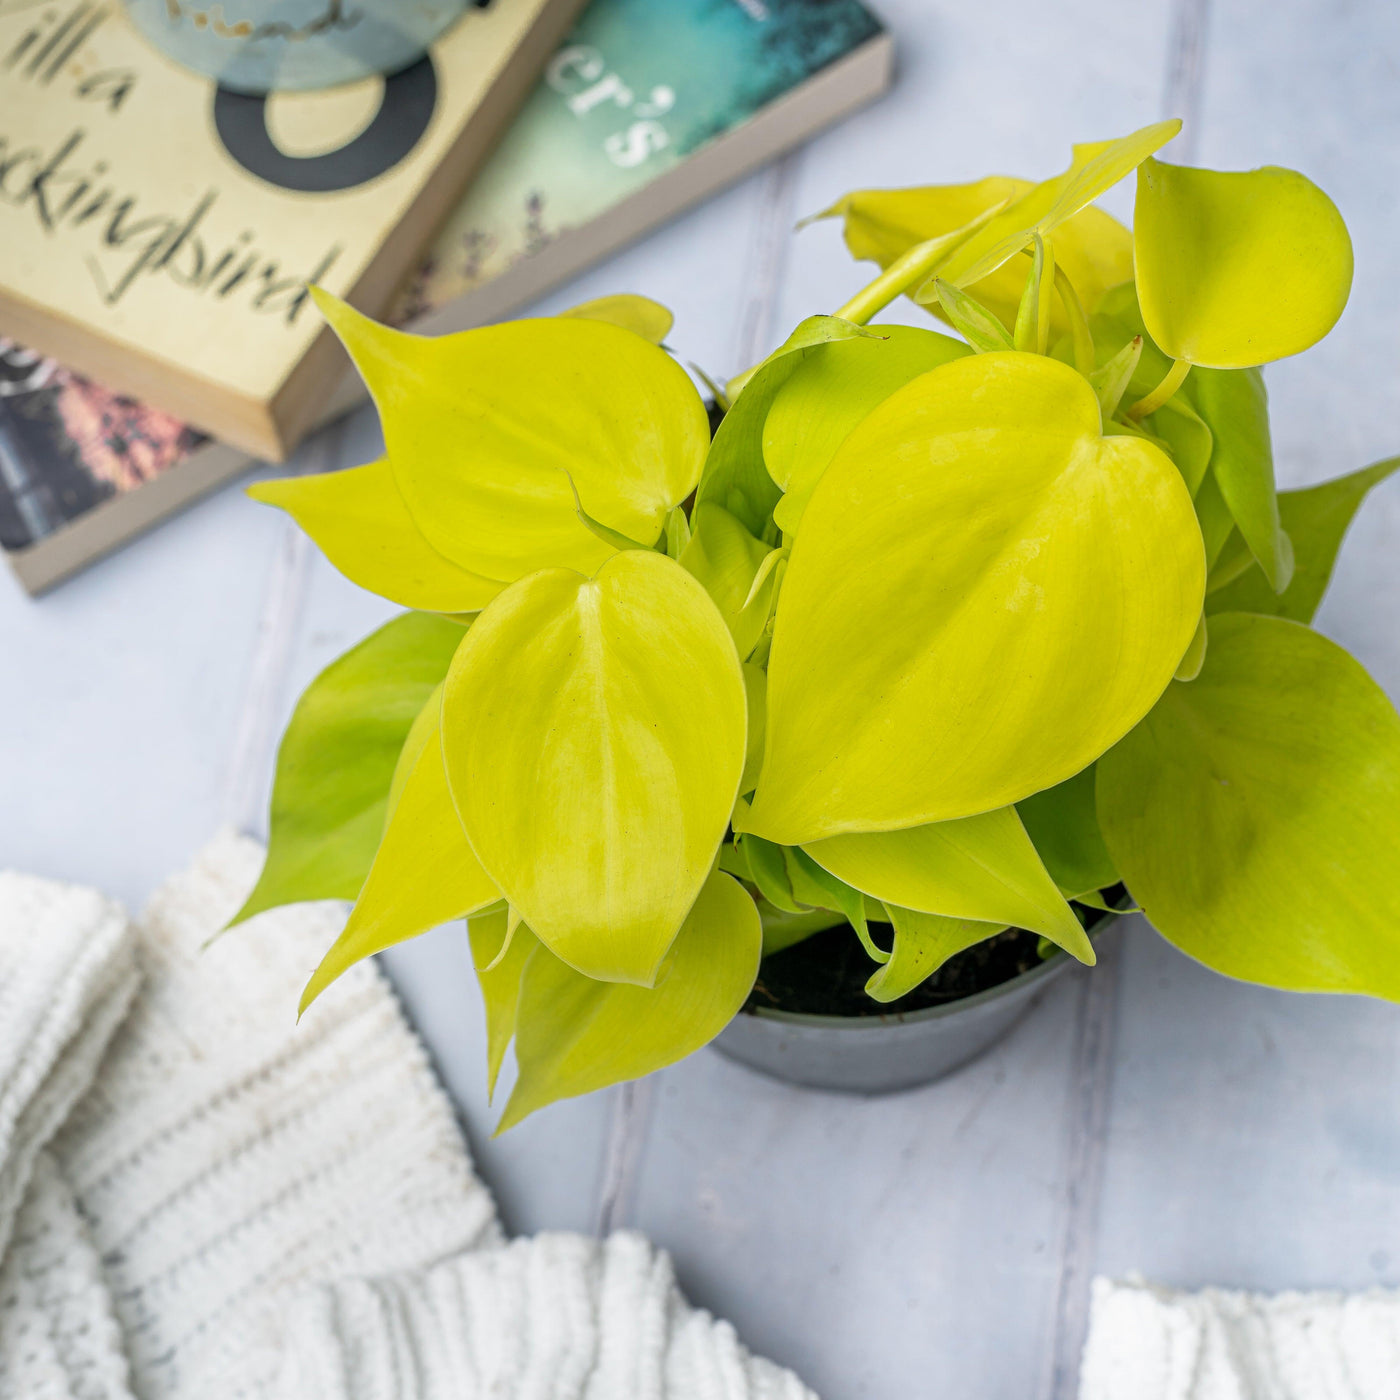 Philodendron Scandens Micans Lime | Trailing Plant - House of Kojo